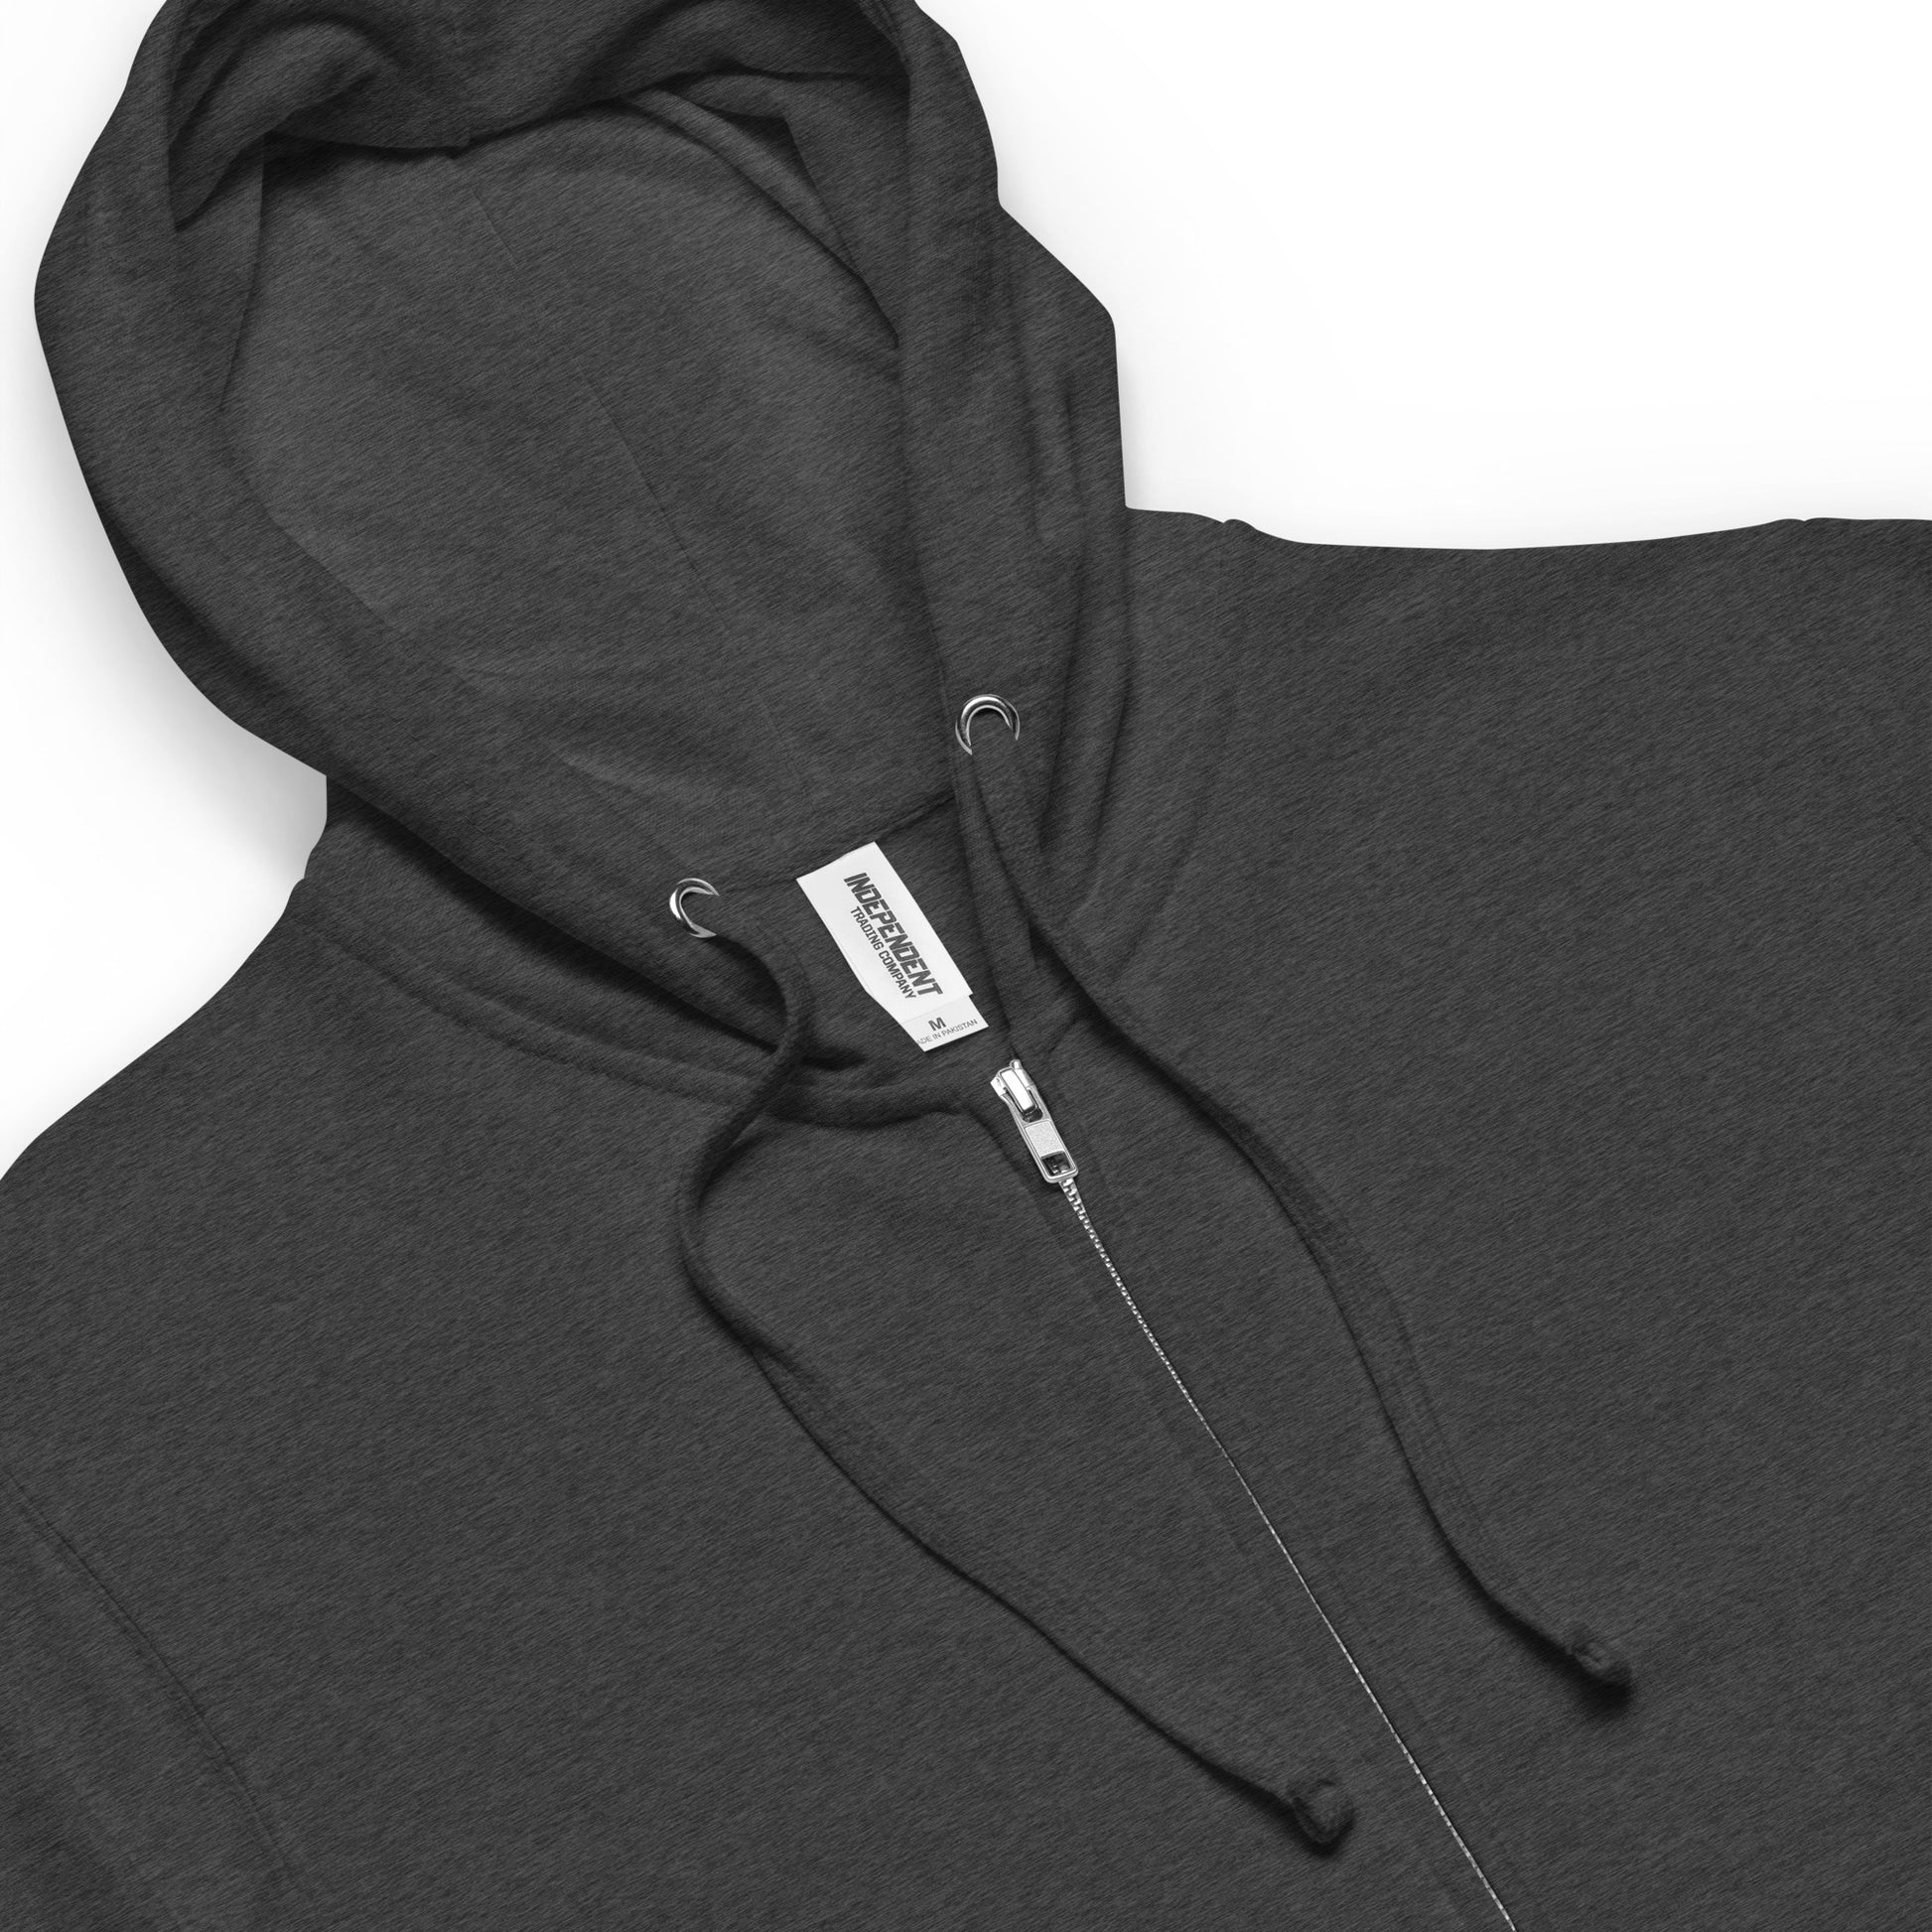 Charcoal heather grey colored unisex zip-up hoodie. Features three manatees with seaweed, seashells, and bubbles on the back. It is made of soft, premium quality fleece fabric and has a jersey-lined hood. Made with 100% cotton face and 80% cotton, 20% polyester blend fleece (Charcoal Heather is 55% cotton, 45% polyester). Features metal eyelets and zipper. Detail image shows metal eyelets, draw cords, jersey-lined hood and metal zipper.